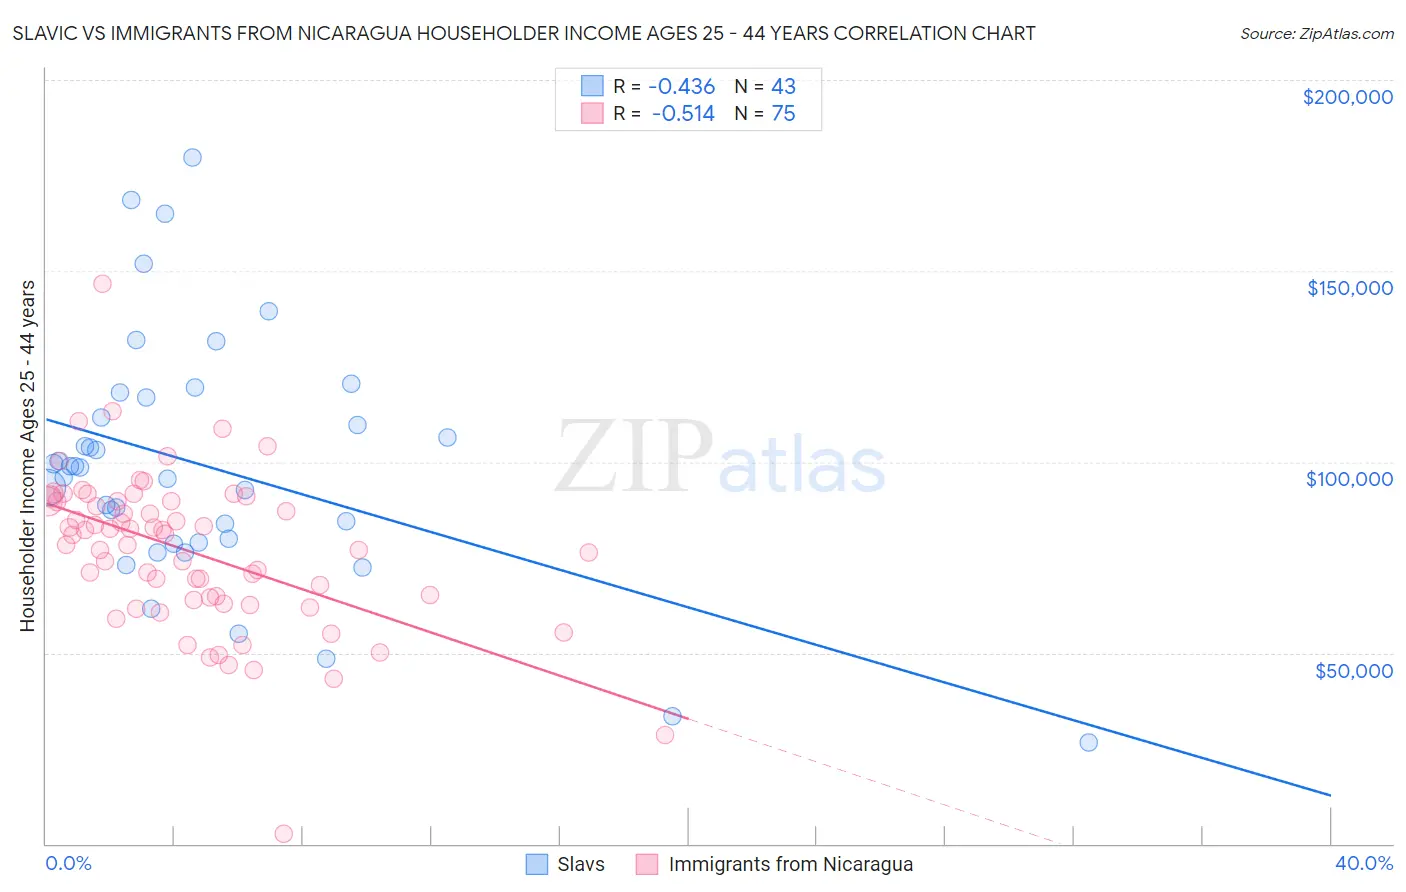 Slavic vs Immigrants from Nicaragua Householder Income Ages 25 - 44 years